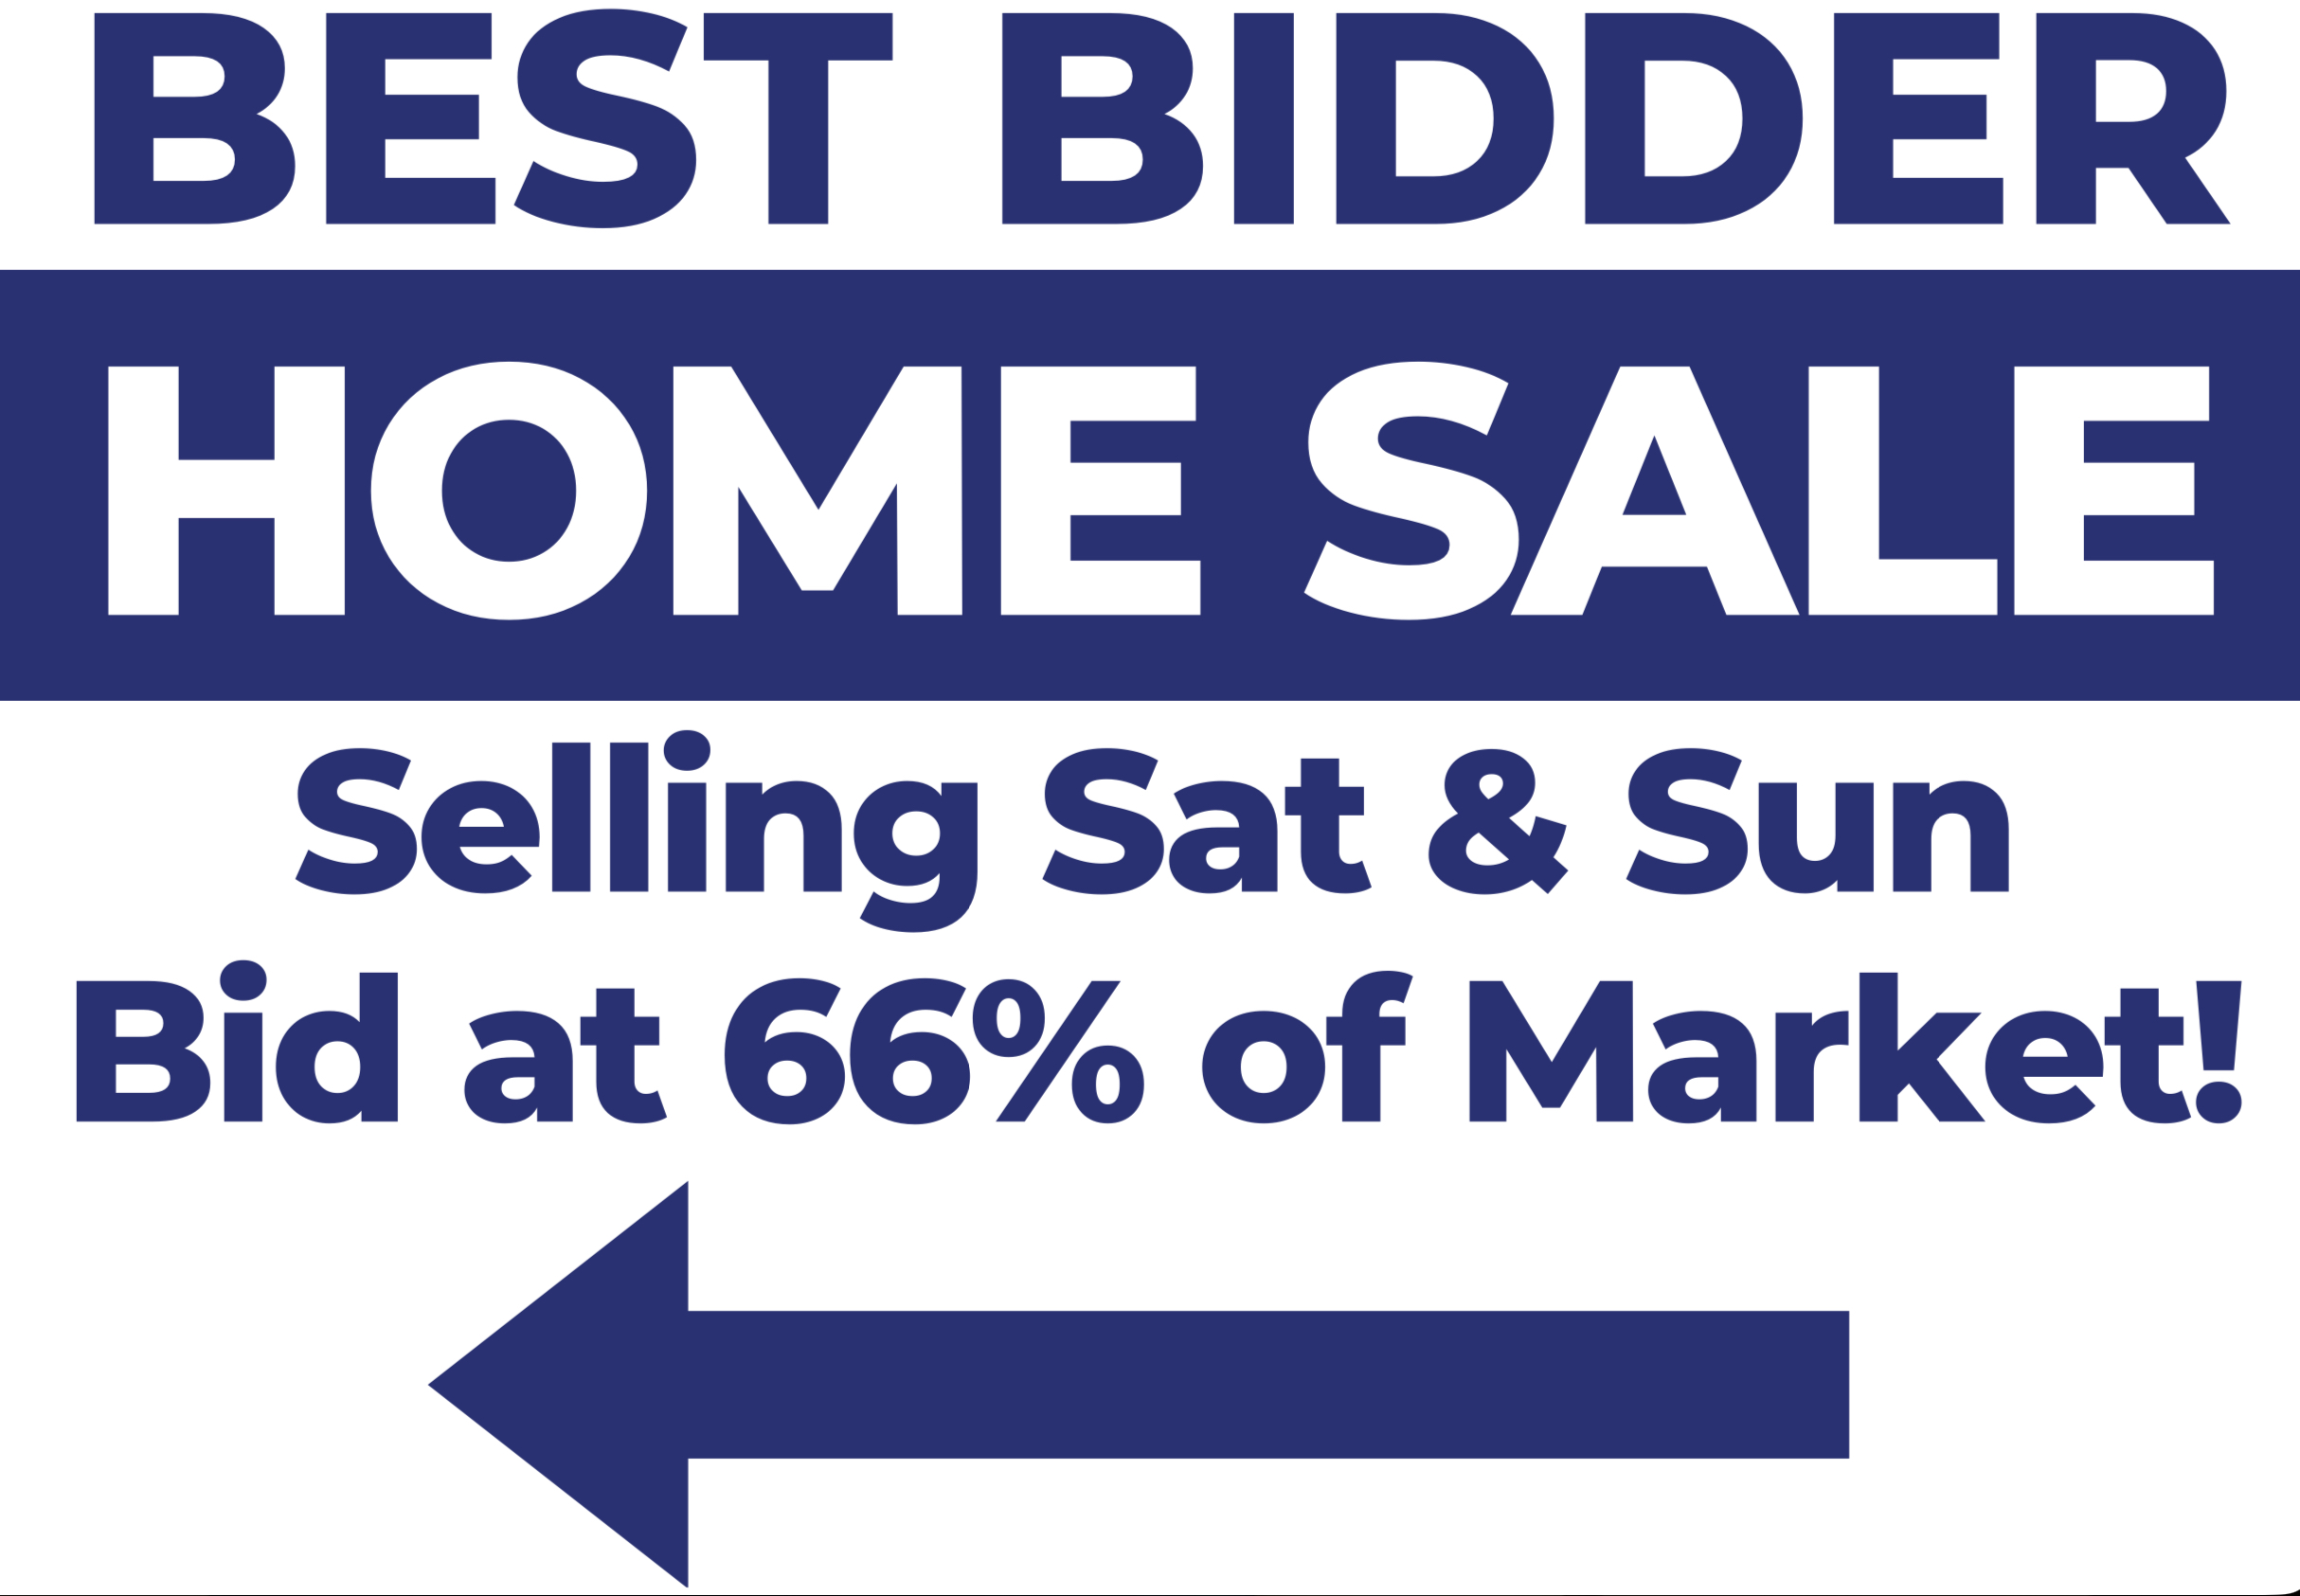 Best bidder home sale gets you the highest net seller proceeds by generating the highest number of buyers possible in seeing your house.